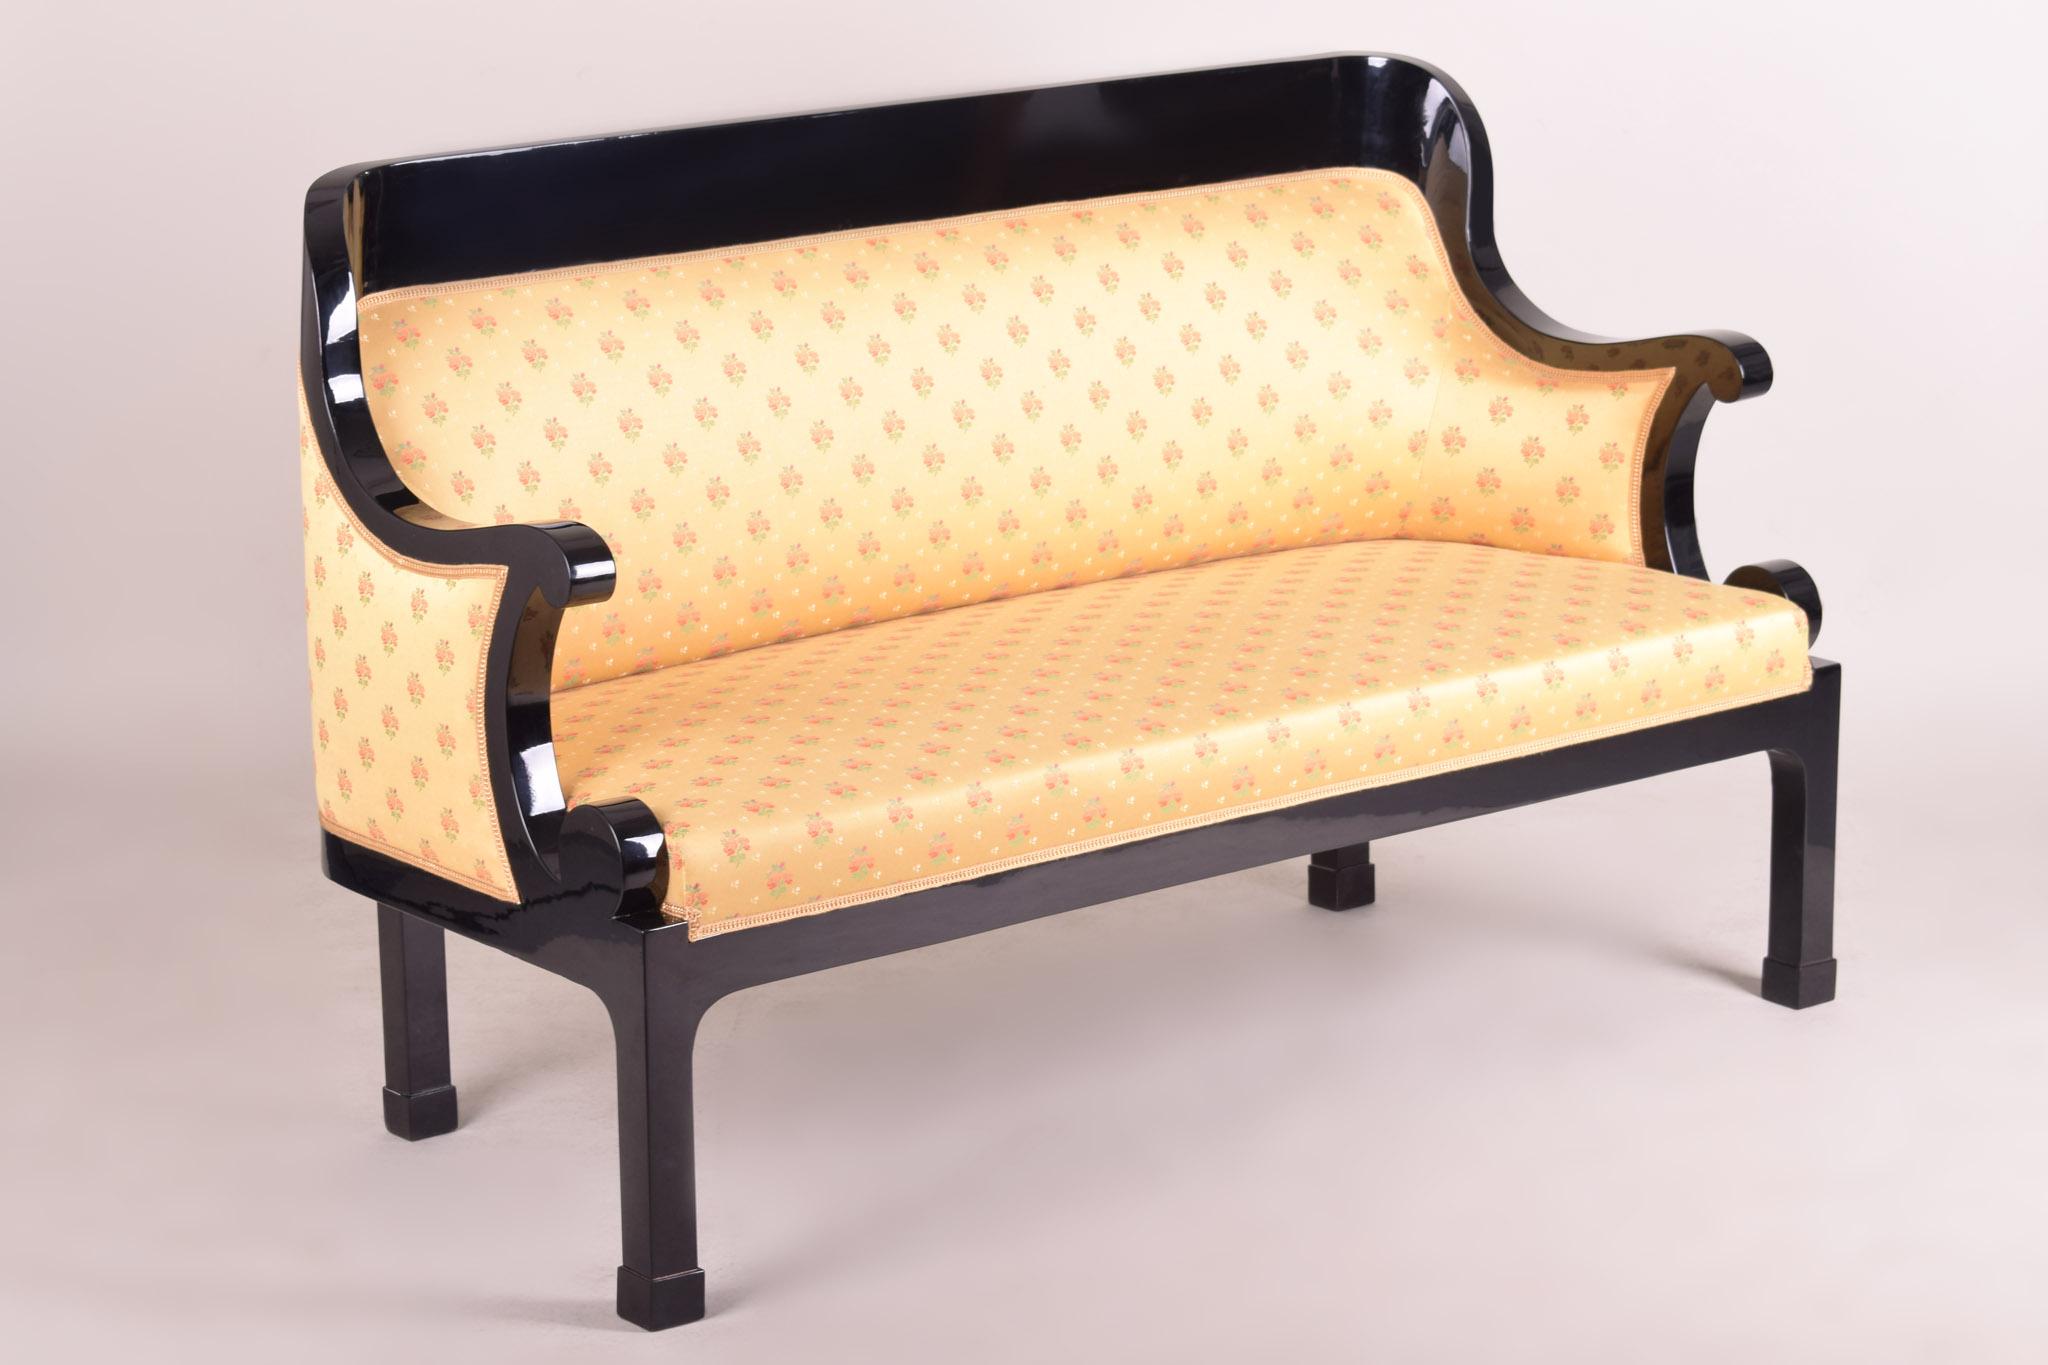 Fabric Czech Empire Sofa, Made in 1810 and Restored, Yellow and Black For Sale